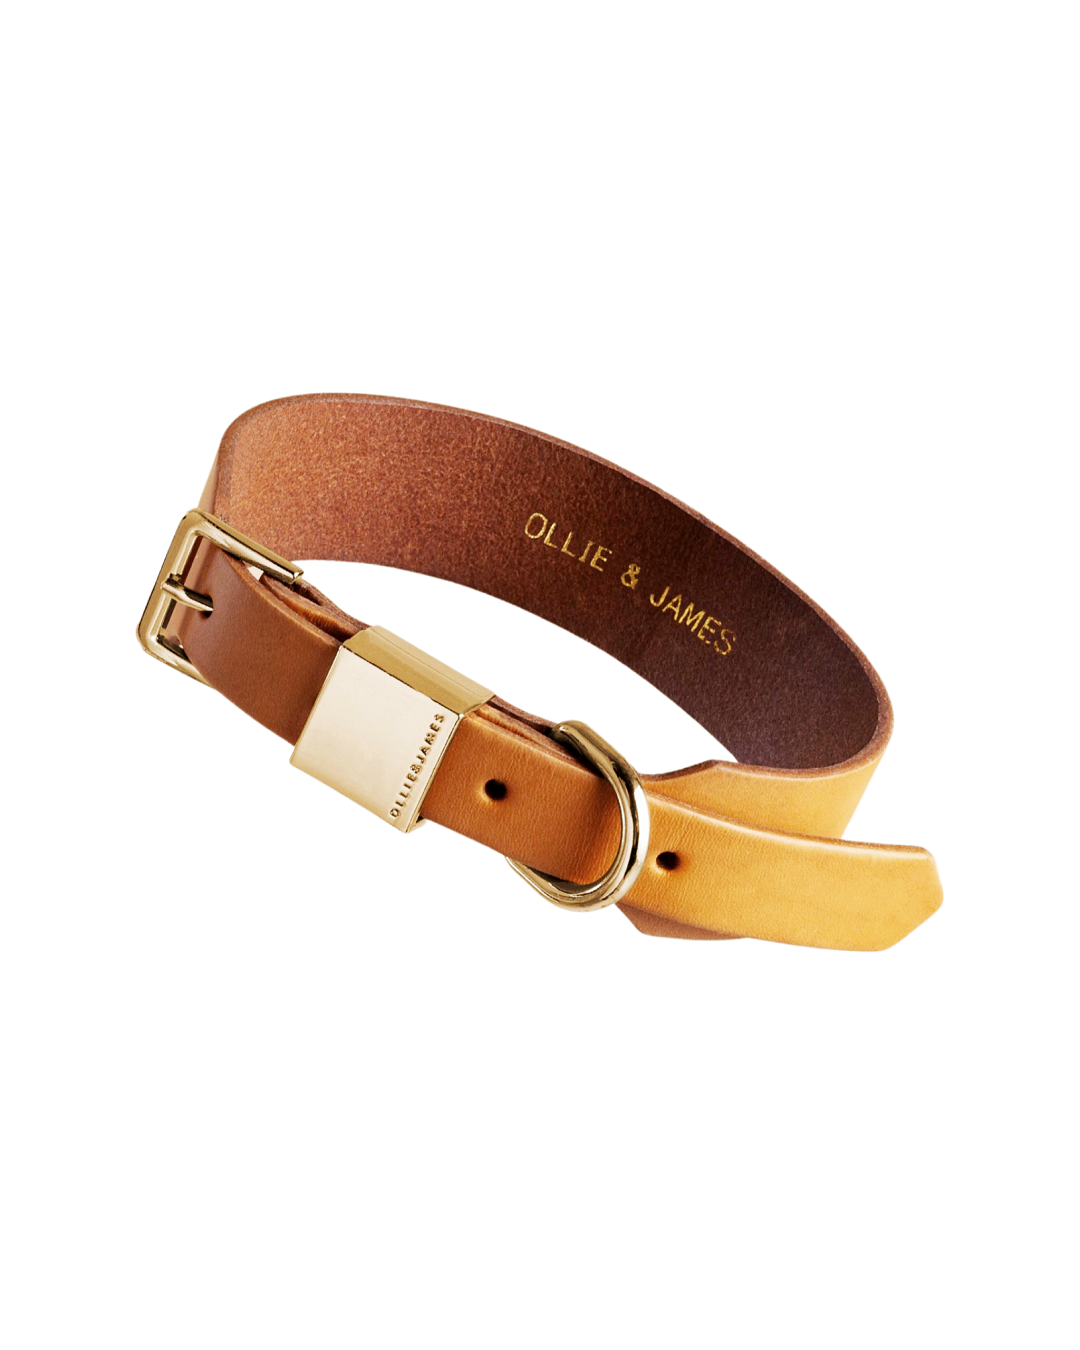 Ollie and James collar in camel leather